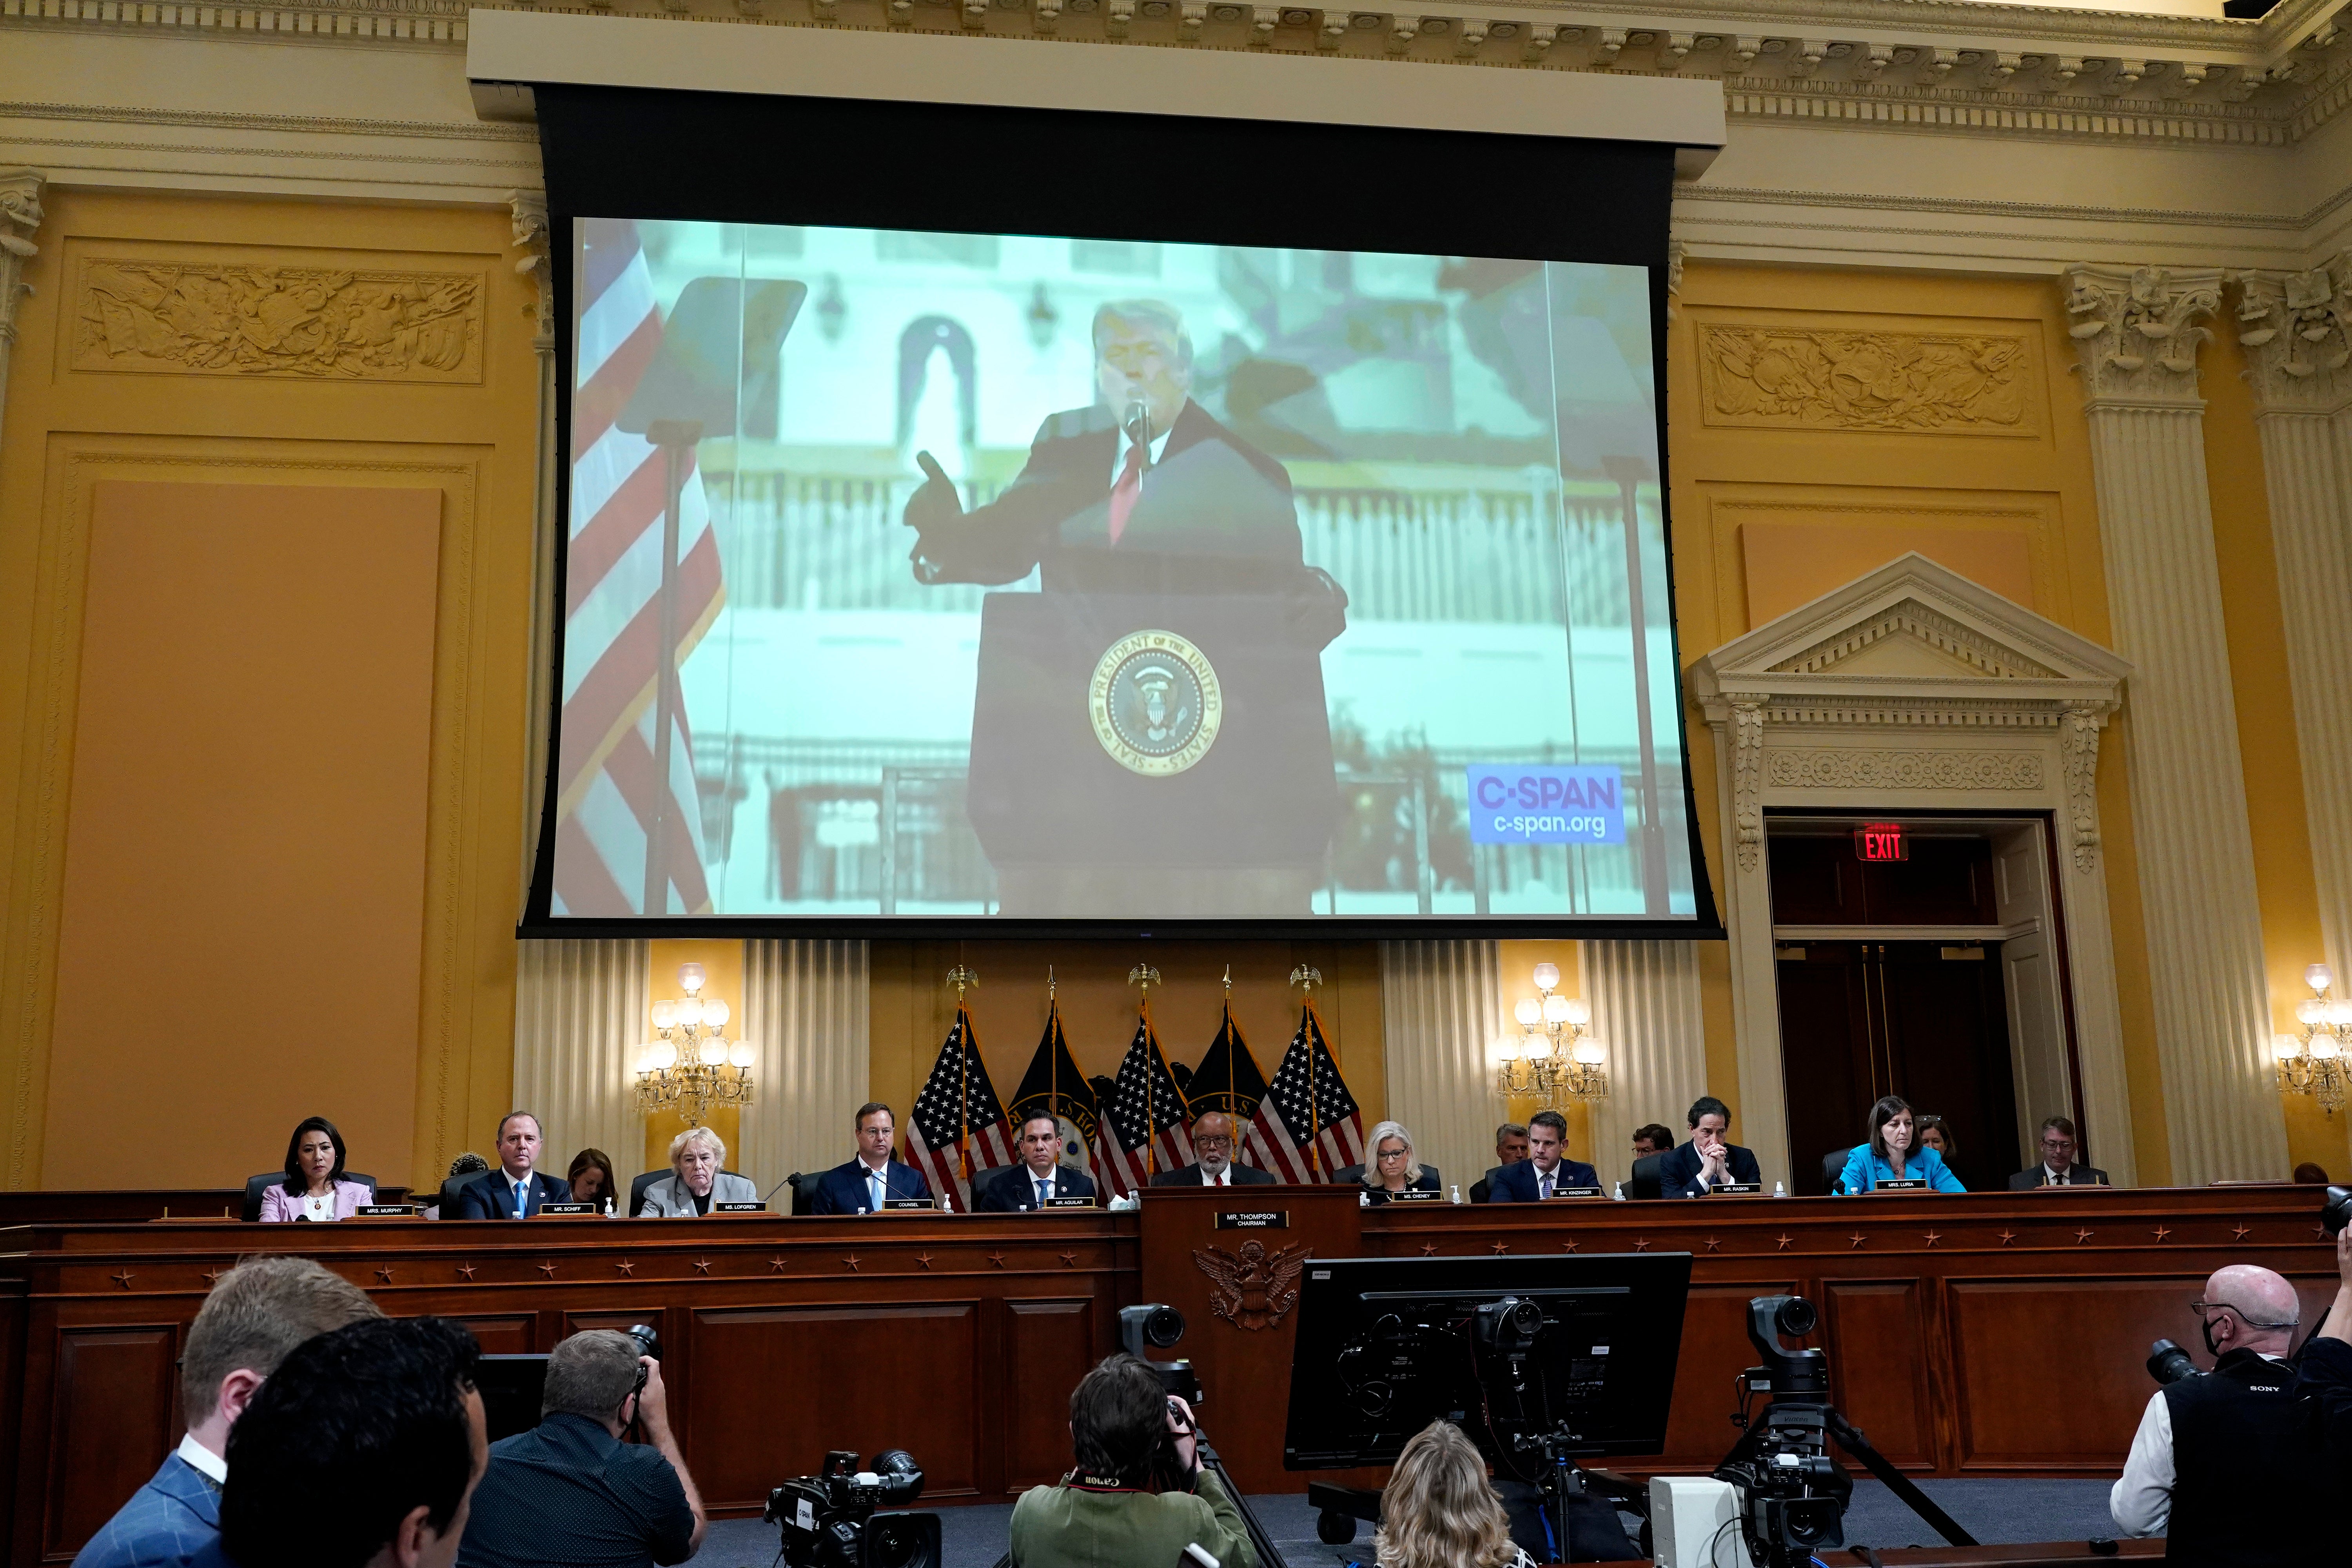 A video of Trump speaking at the ‘Stop the Steal’ rally on 6 January 2021 is played during a select committee hearing